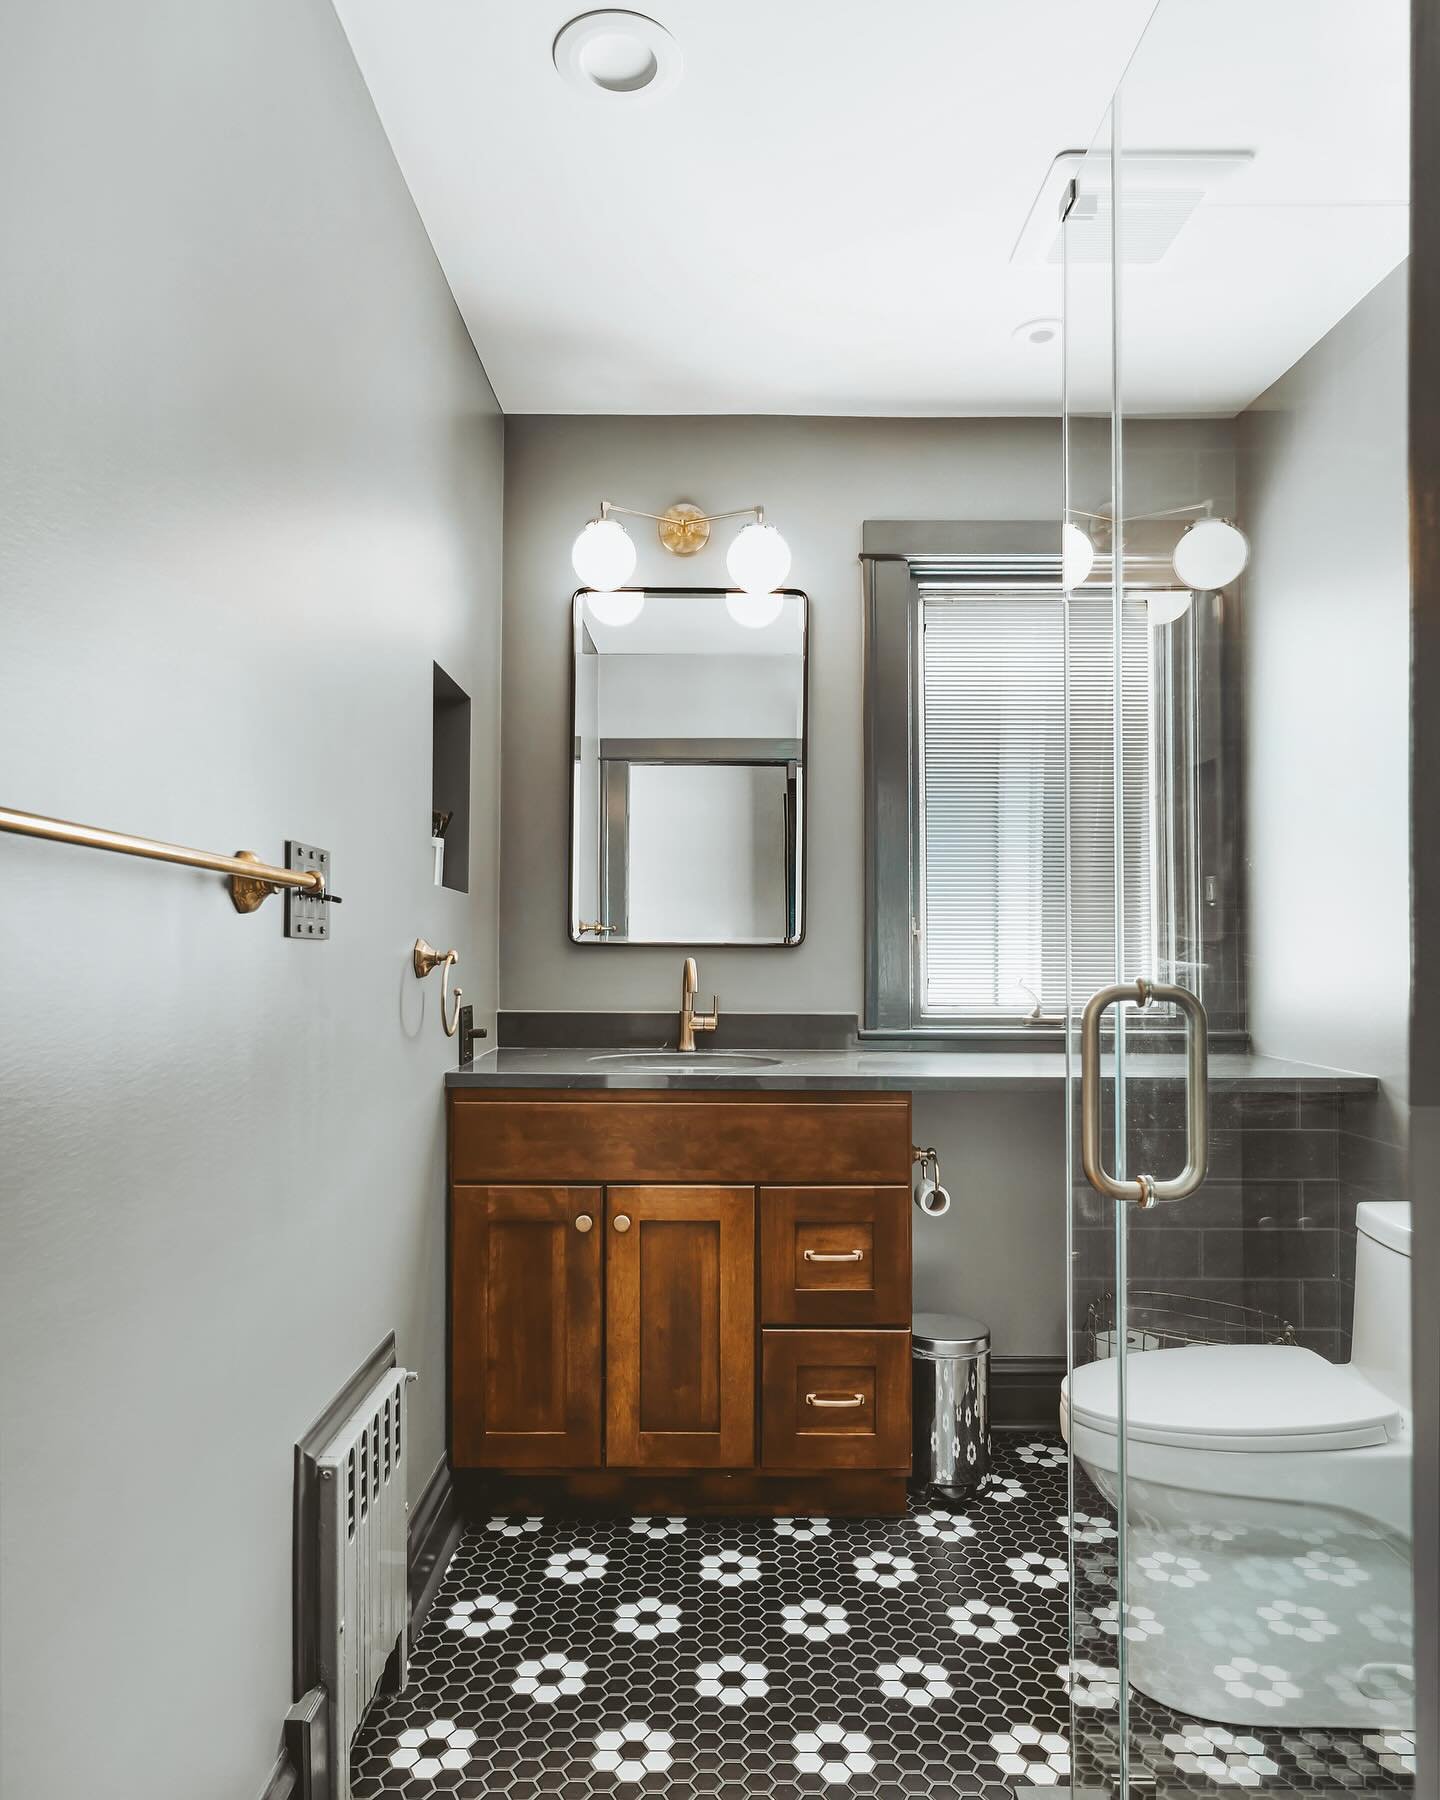 A black tile bathroom accented with natural wood creates a striking contrast, blending modern elegance with organic warmth. The dark tiles provide a sleek backdrop while the natural wood adds a touch of earthy sophistication
#magdainteriors 

🔨 @4ev